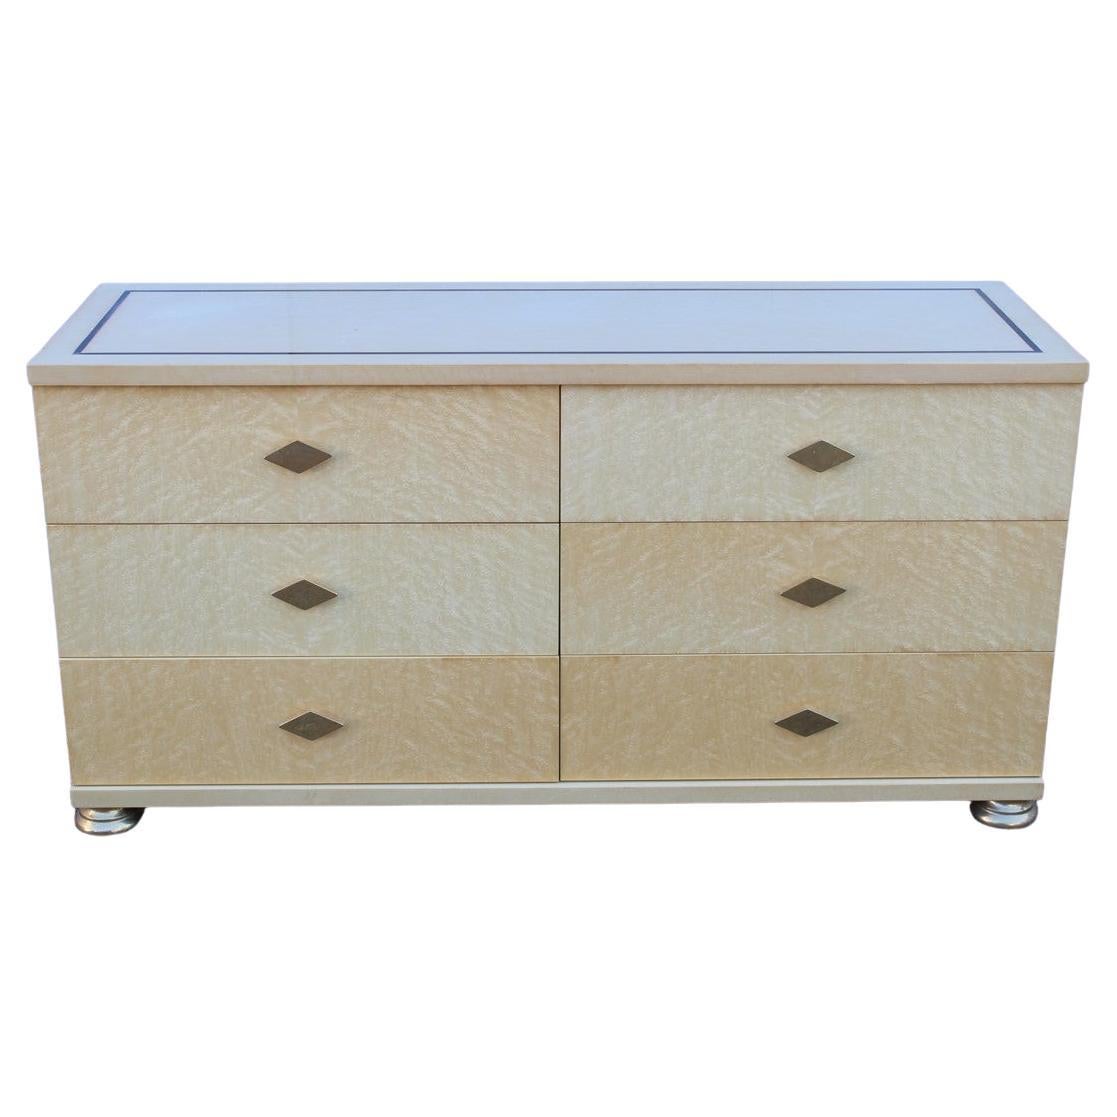 Italian Low Chest of Drawers in Maple and Brass 1970s Rectangular Tommaso Barbi